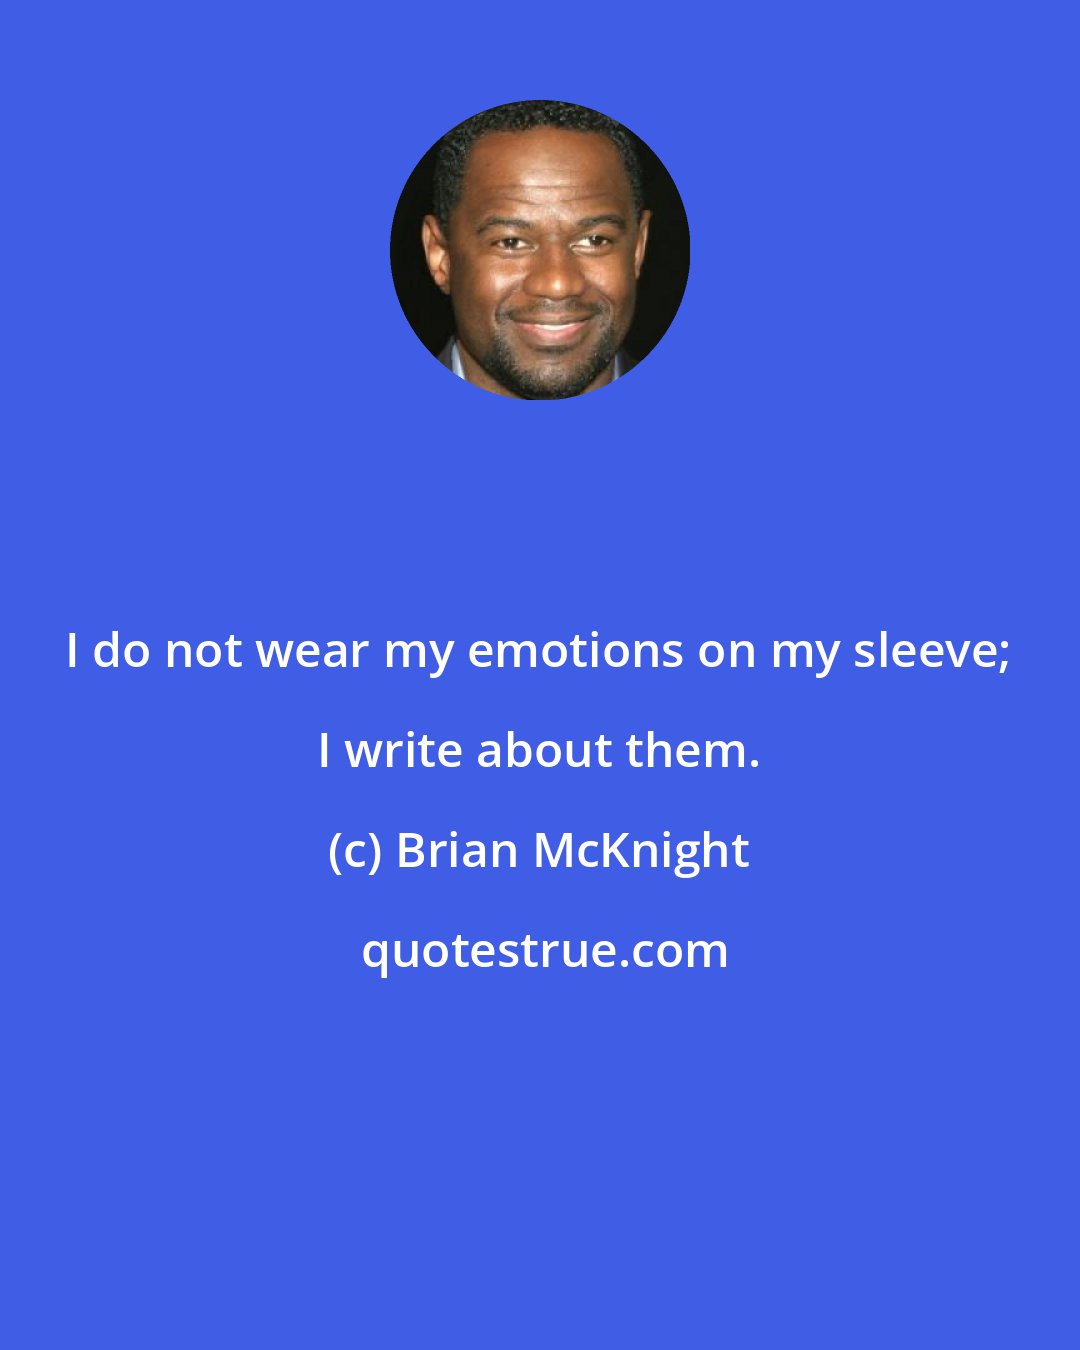 Brian McKnight: I do not wear my emotions on my sleeve; I write about them.